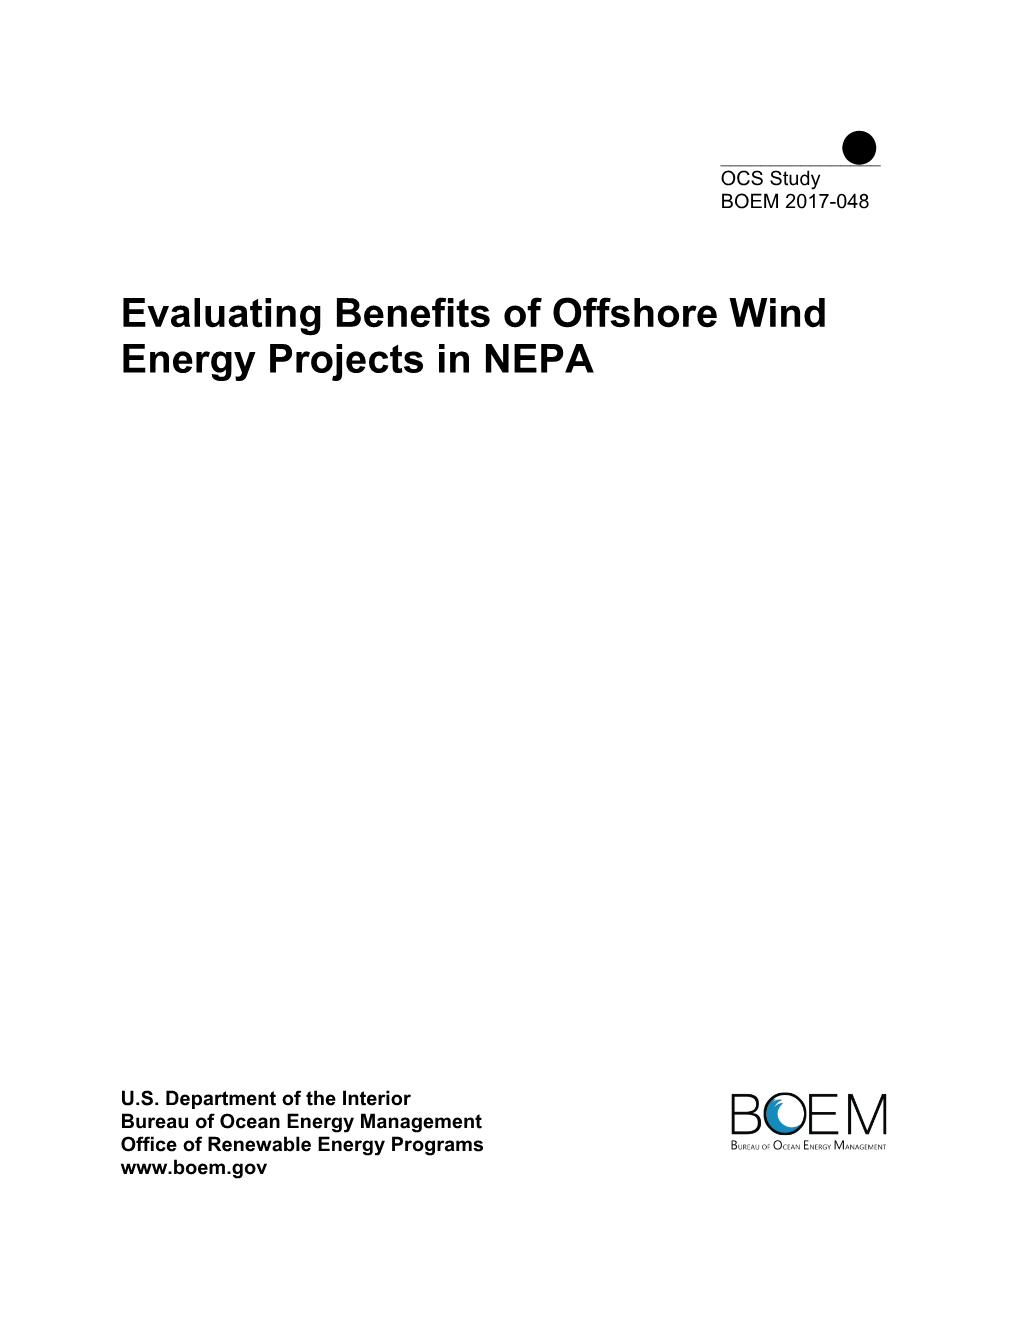 Evaluating Benefits of Offshore Wind Energy Projects in NEPA